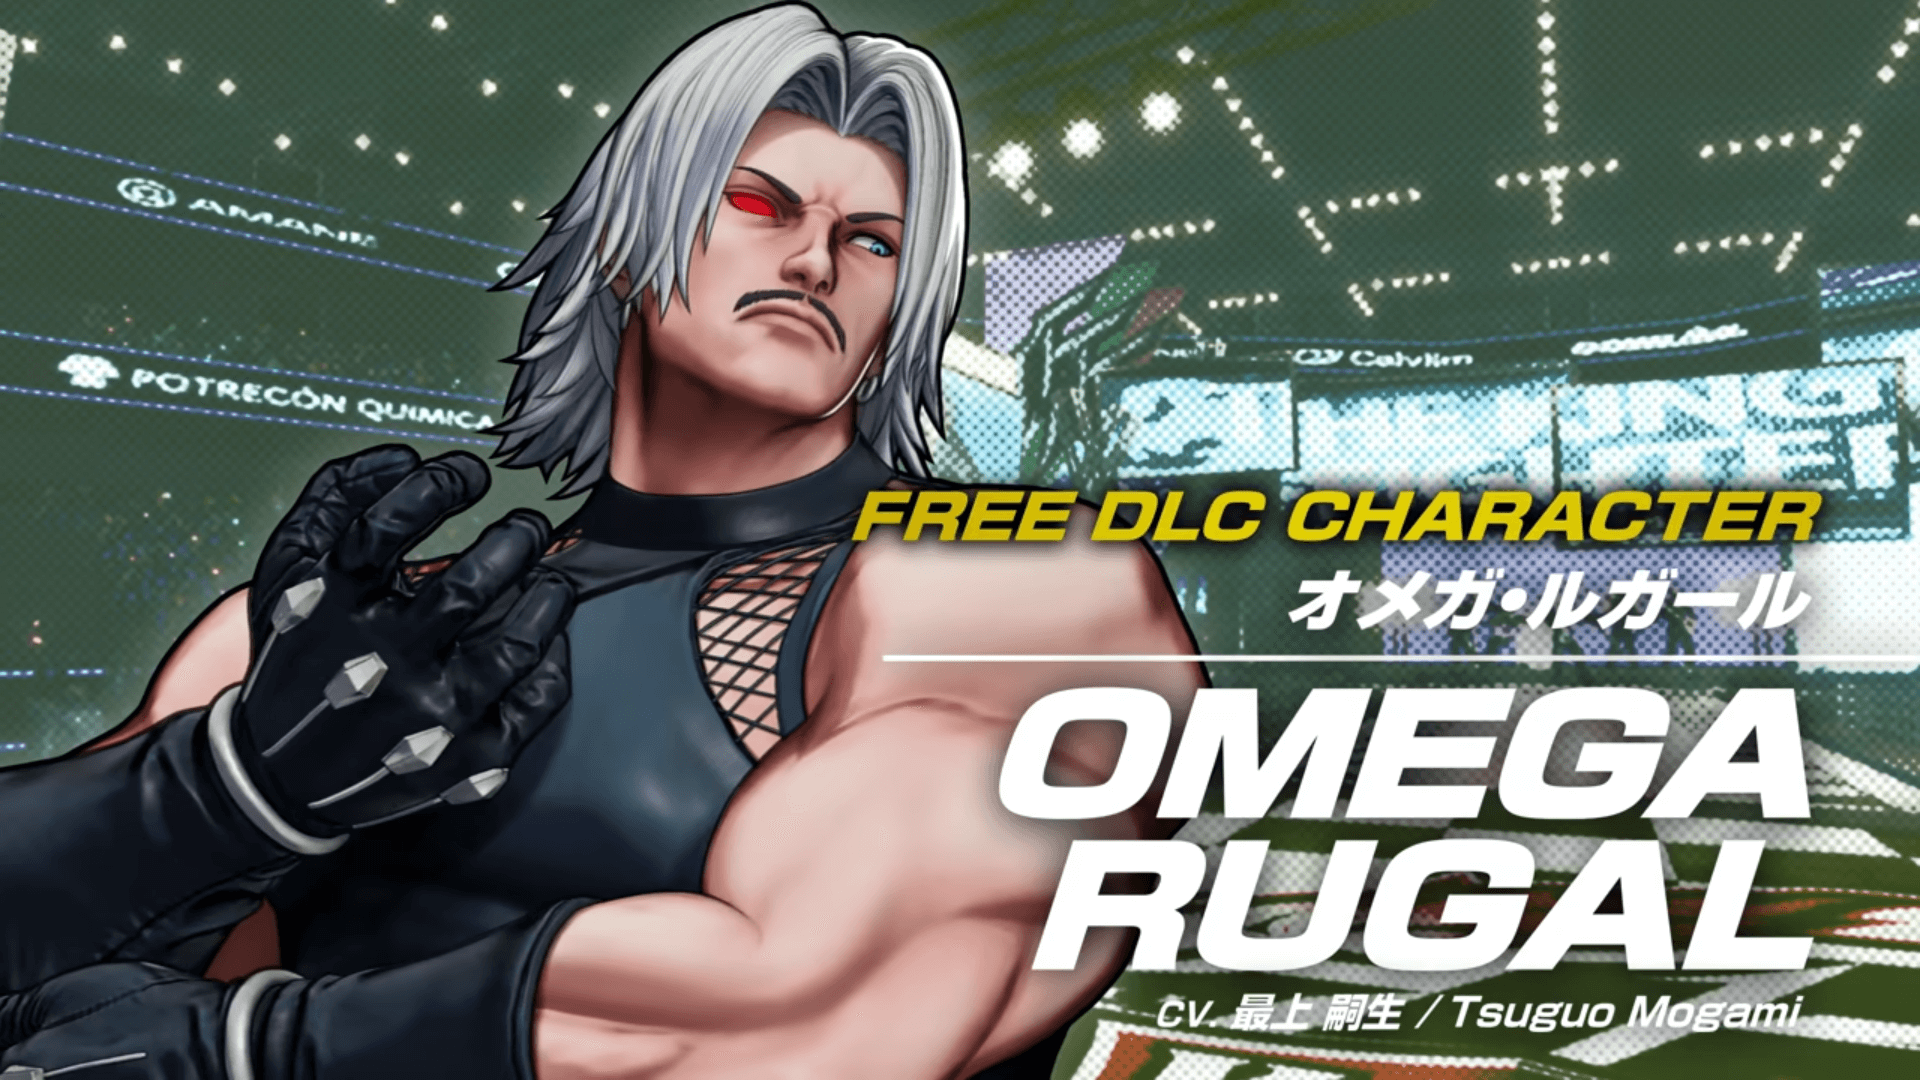 Are You Ready for Omega Rugal Challenge in KOF XV